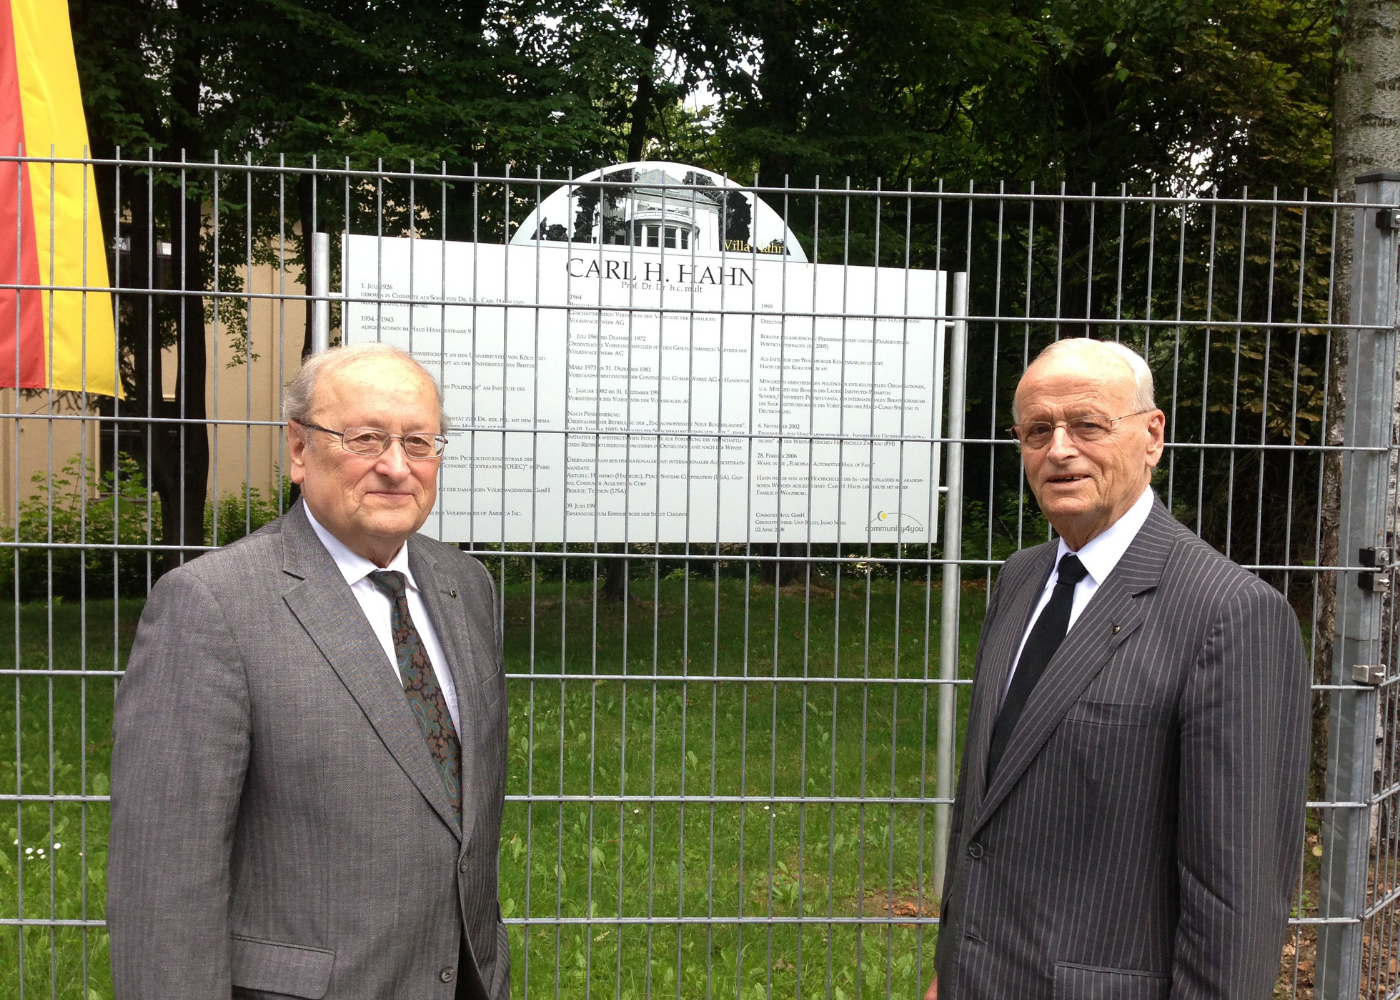 The brothers Carl and Wolfgang Hahn visited their former home, the 